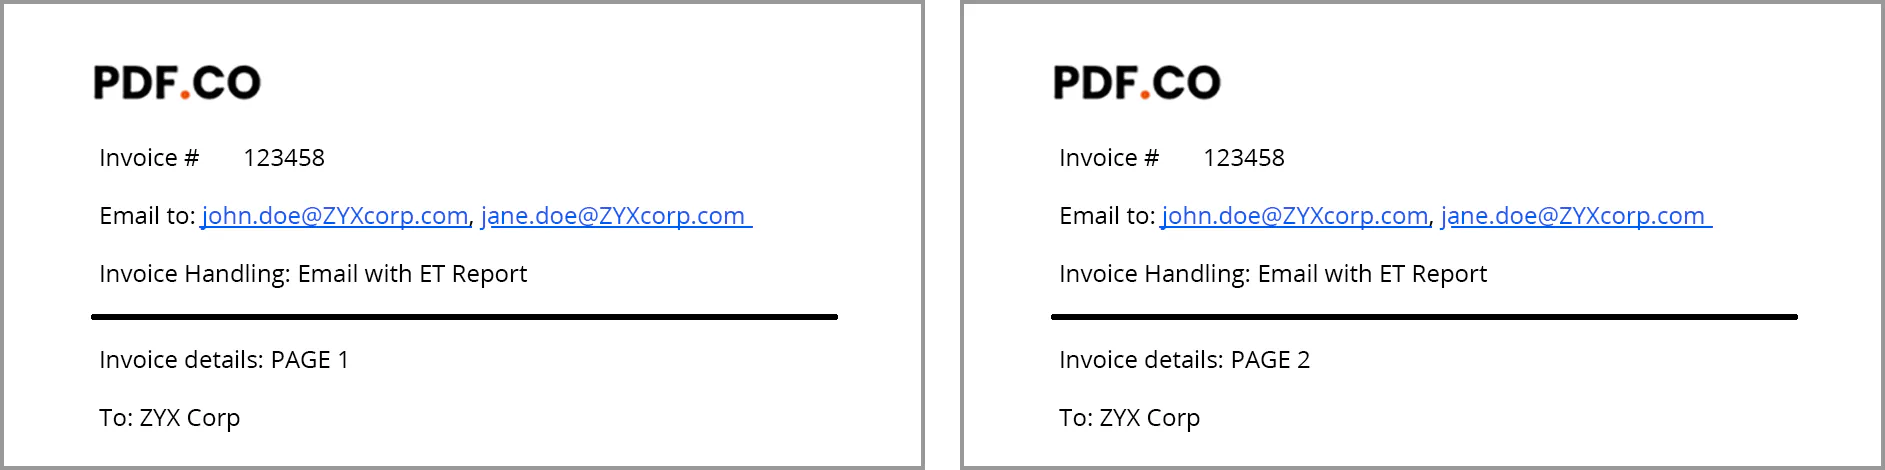 Multipage invoices